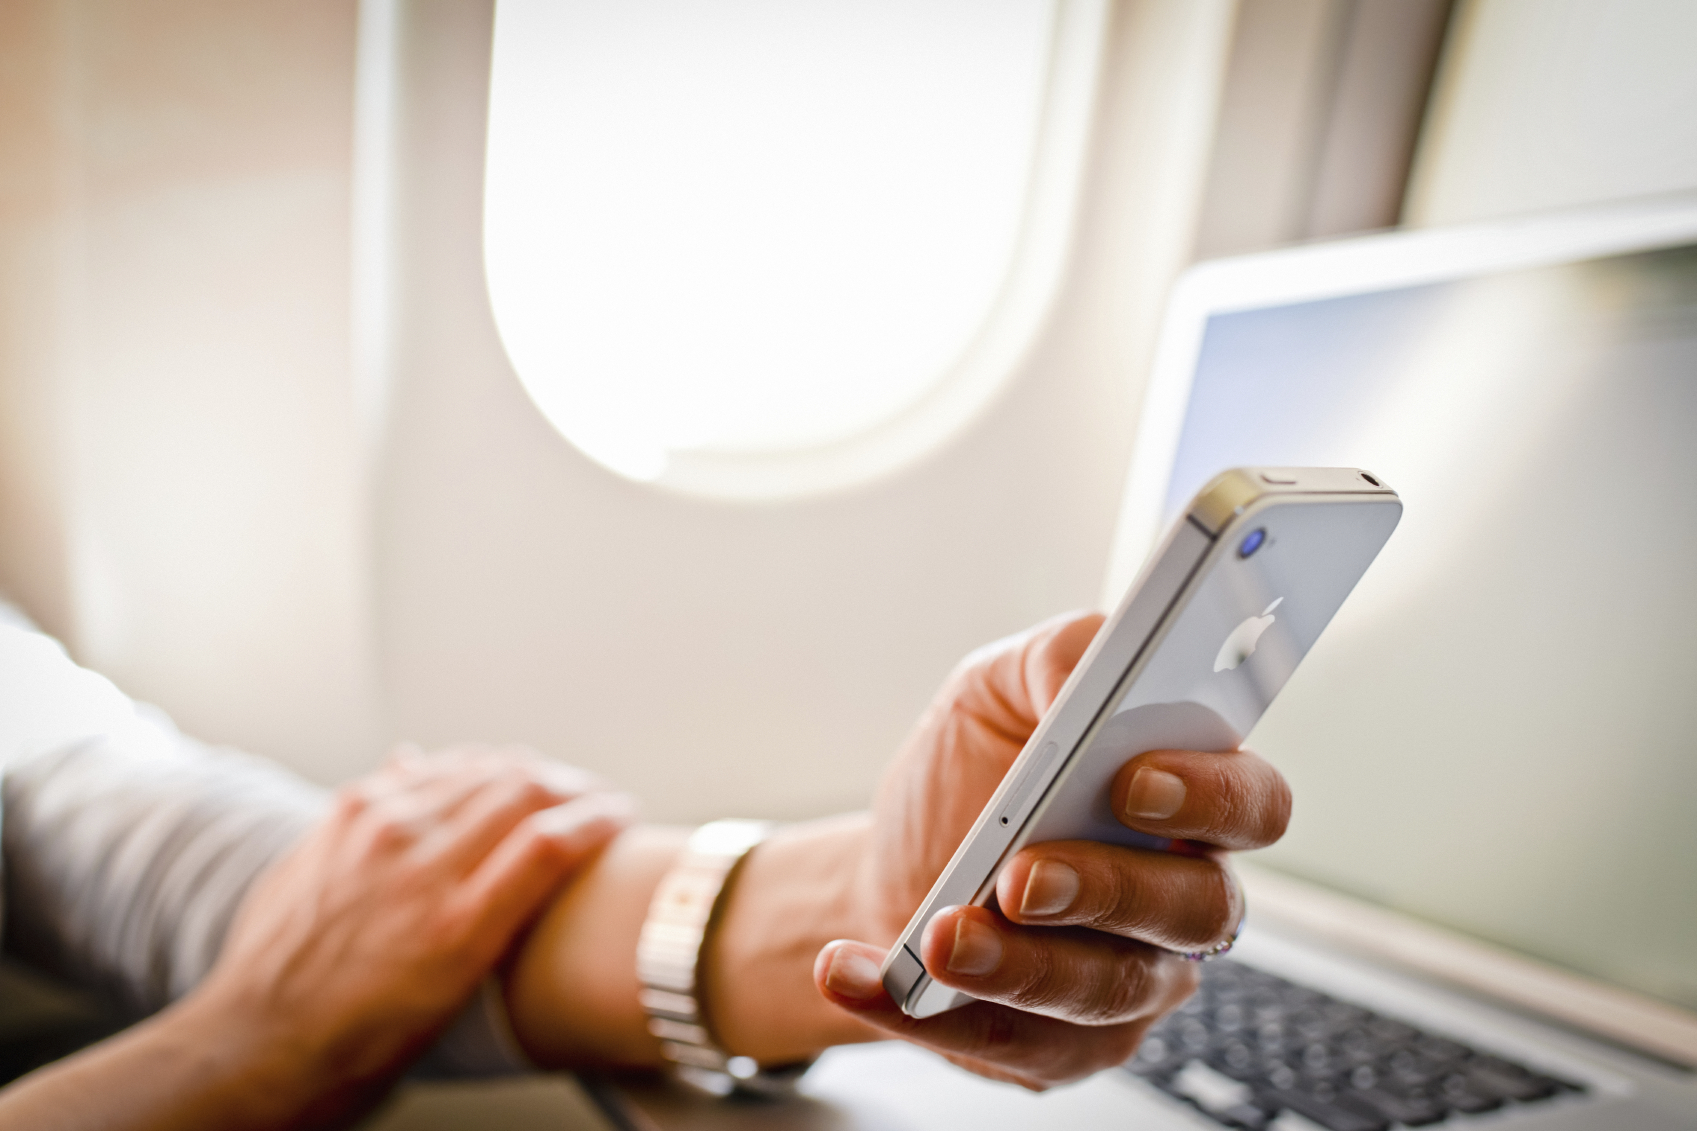 Woman using iPhone 4s and laptop in airplane during flight